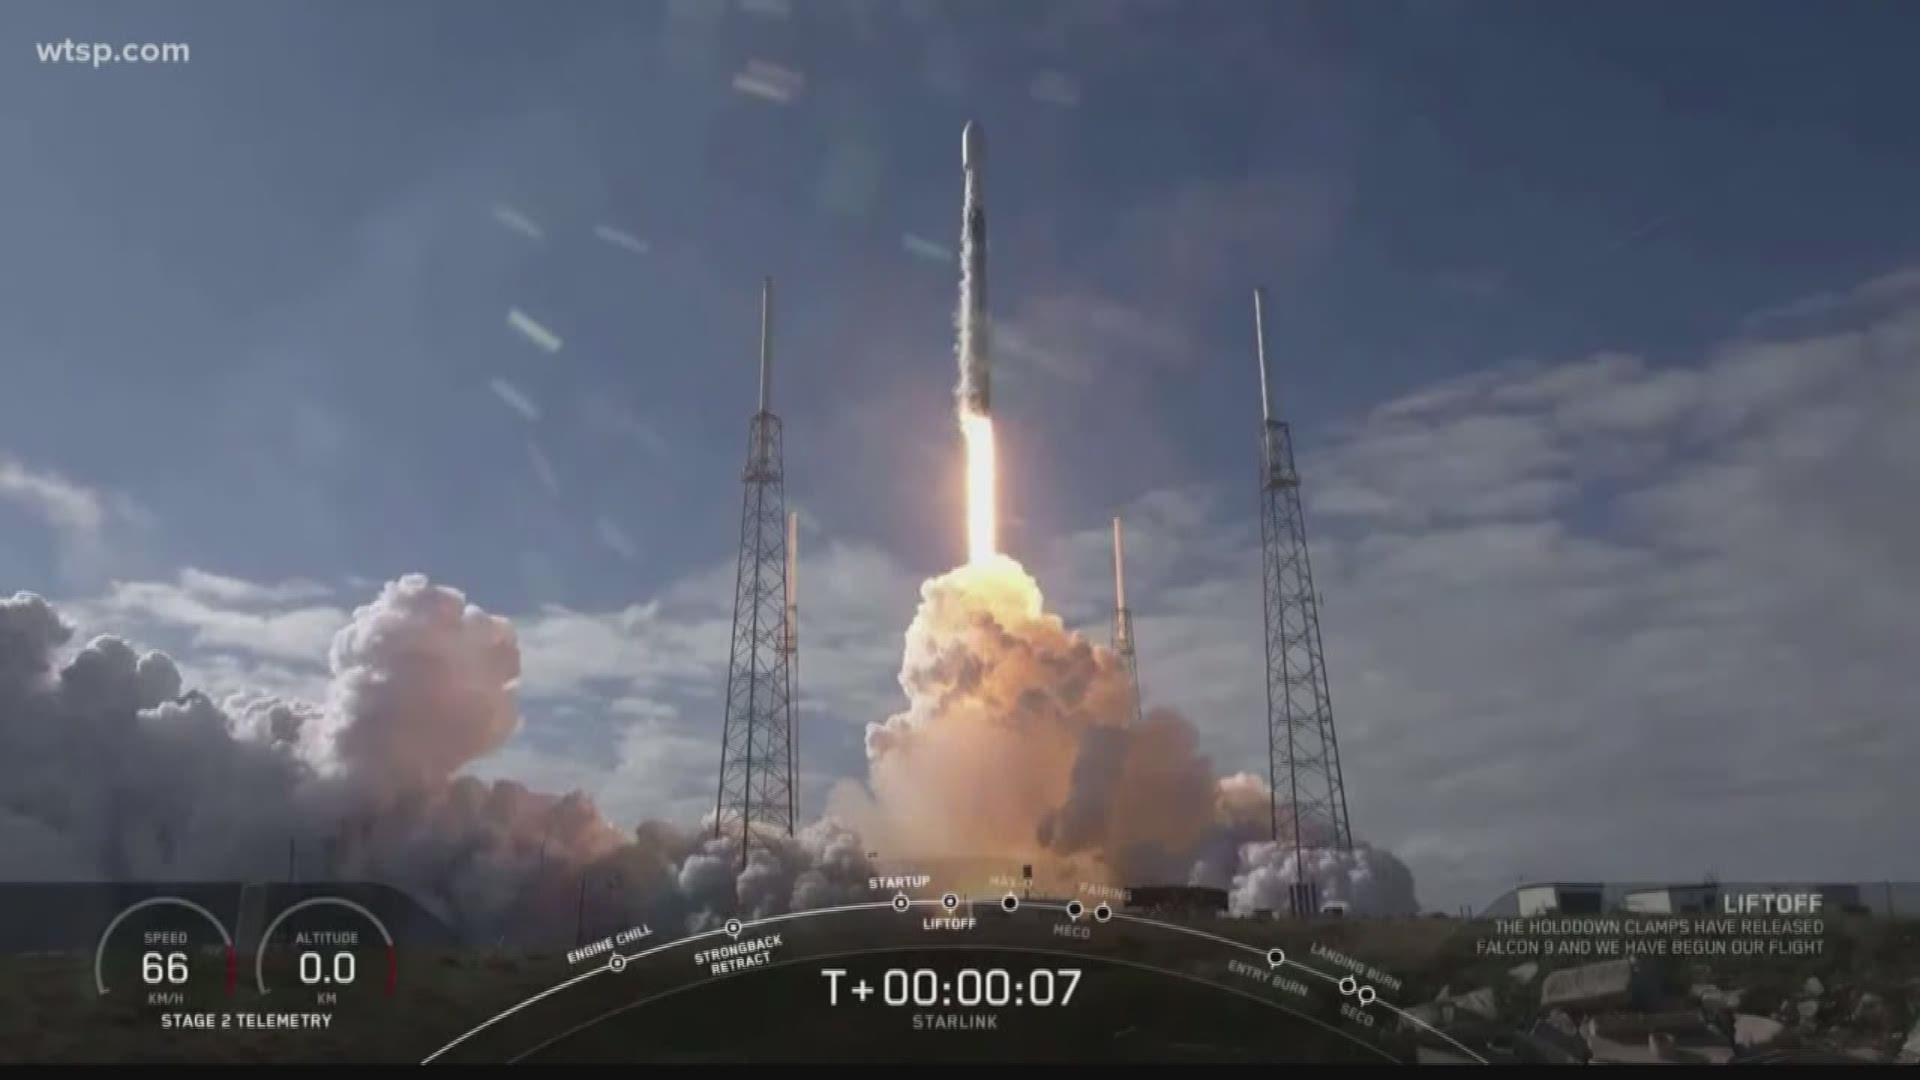 The batch of 60 satellites launched aboard a Falcon 9 rocket from Kennedy Space Center in Florida.